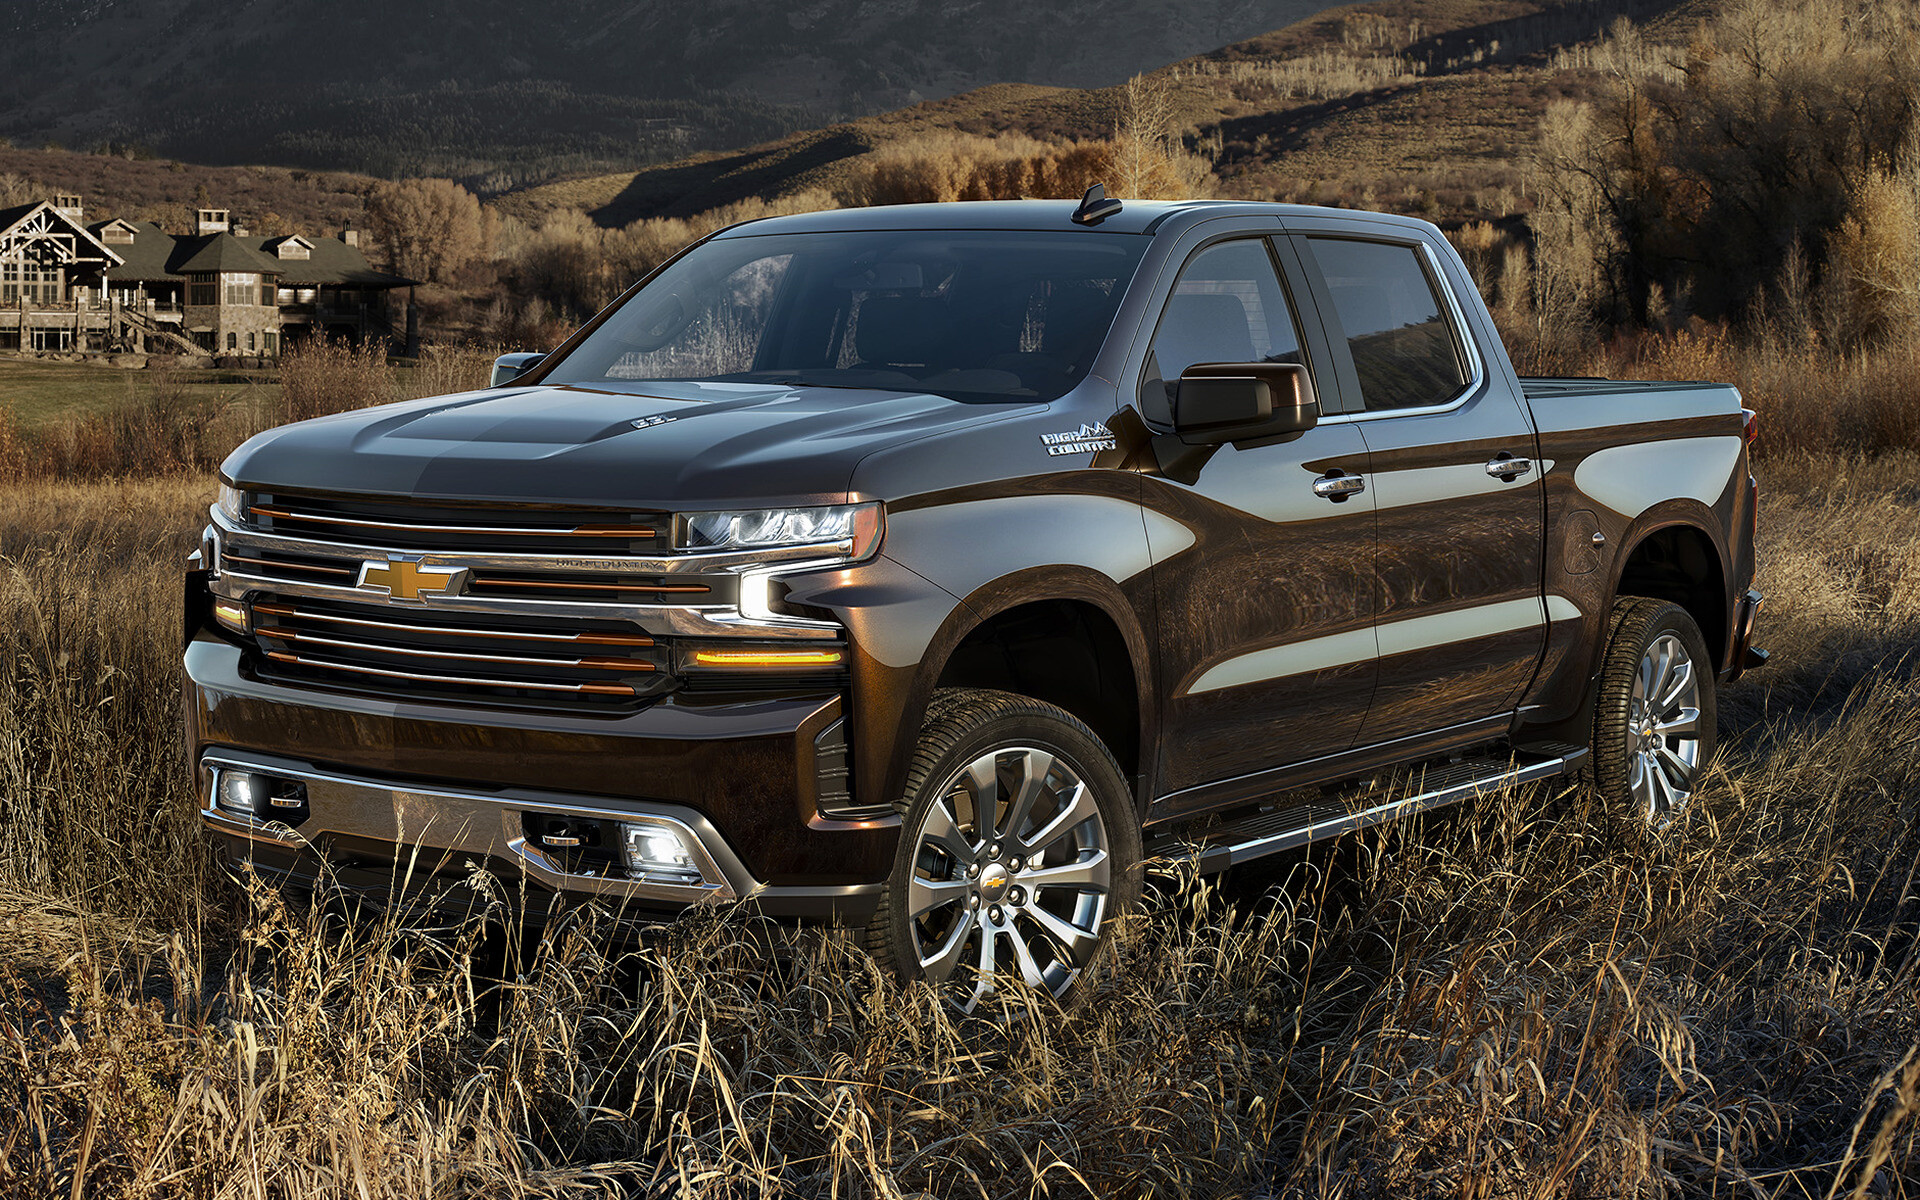 Chevrolet Silverado: High Country package, The crew cab model, 2019 full-size pickup. 1920x1200 HD Wallpaper.